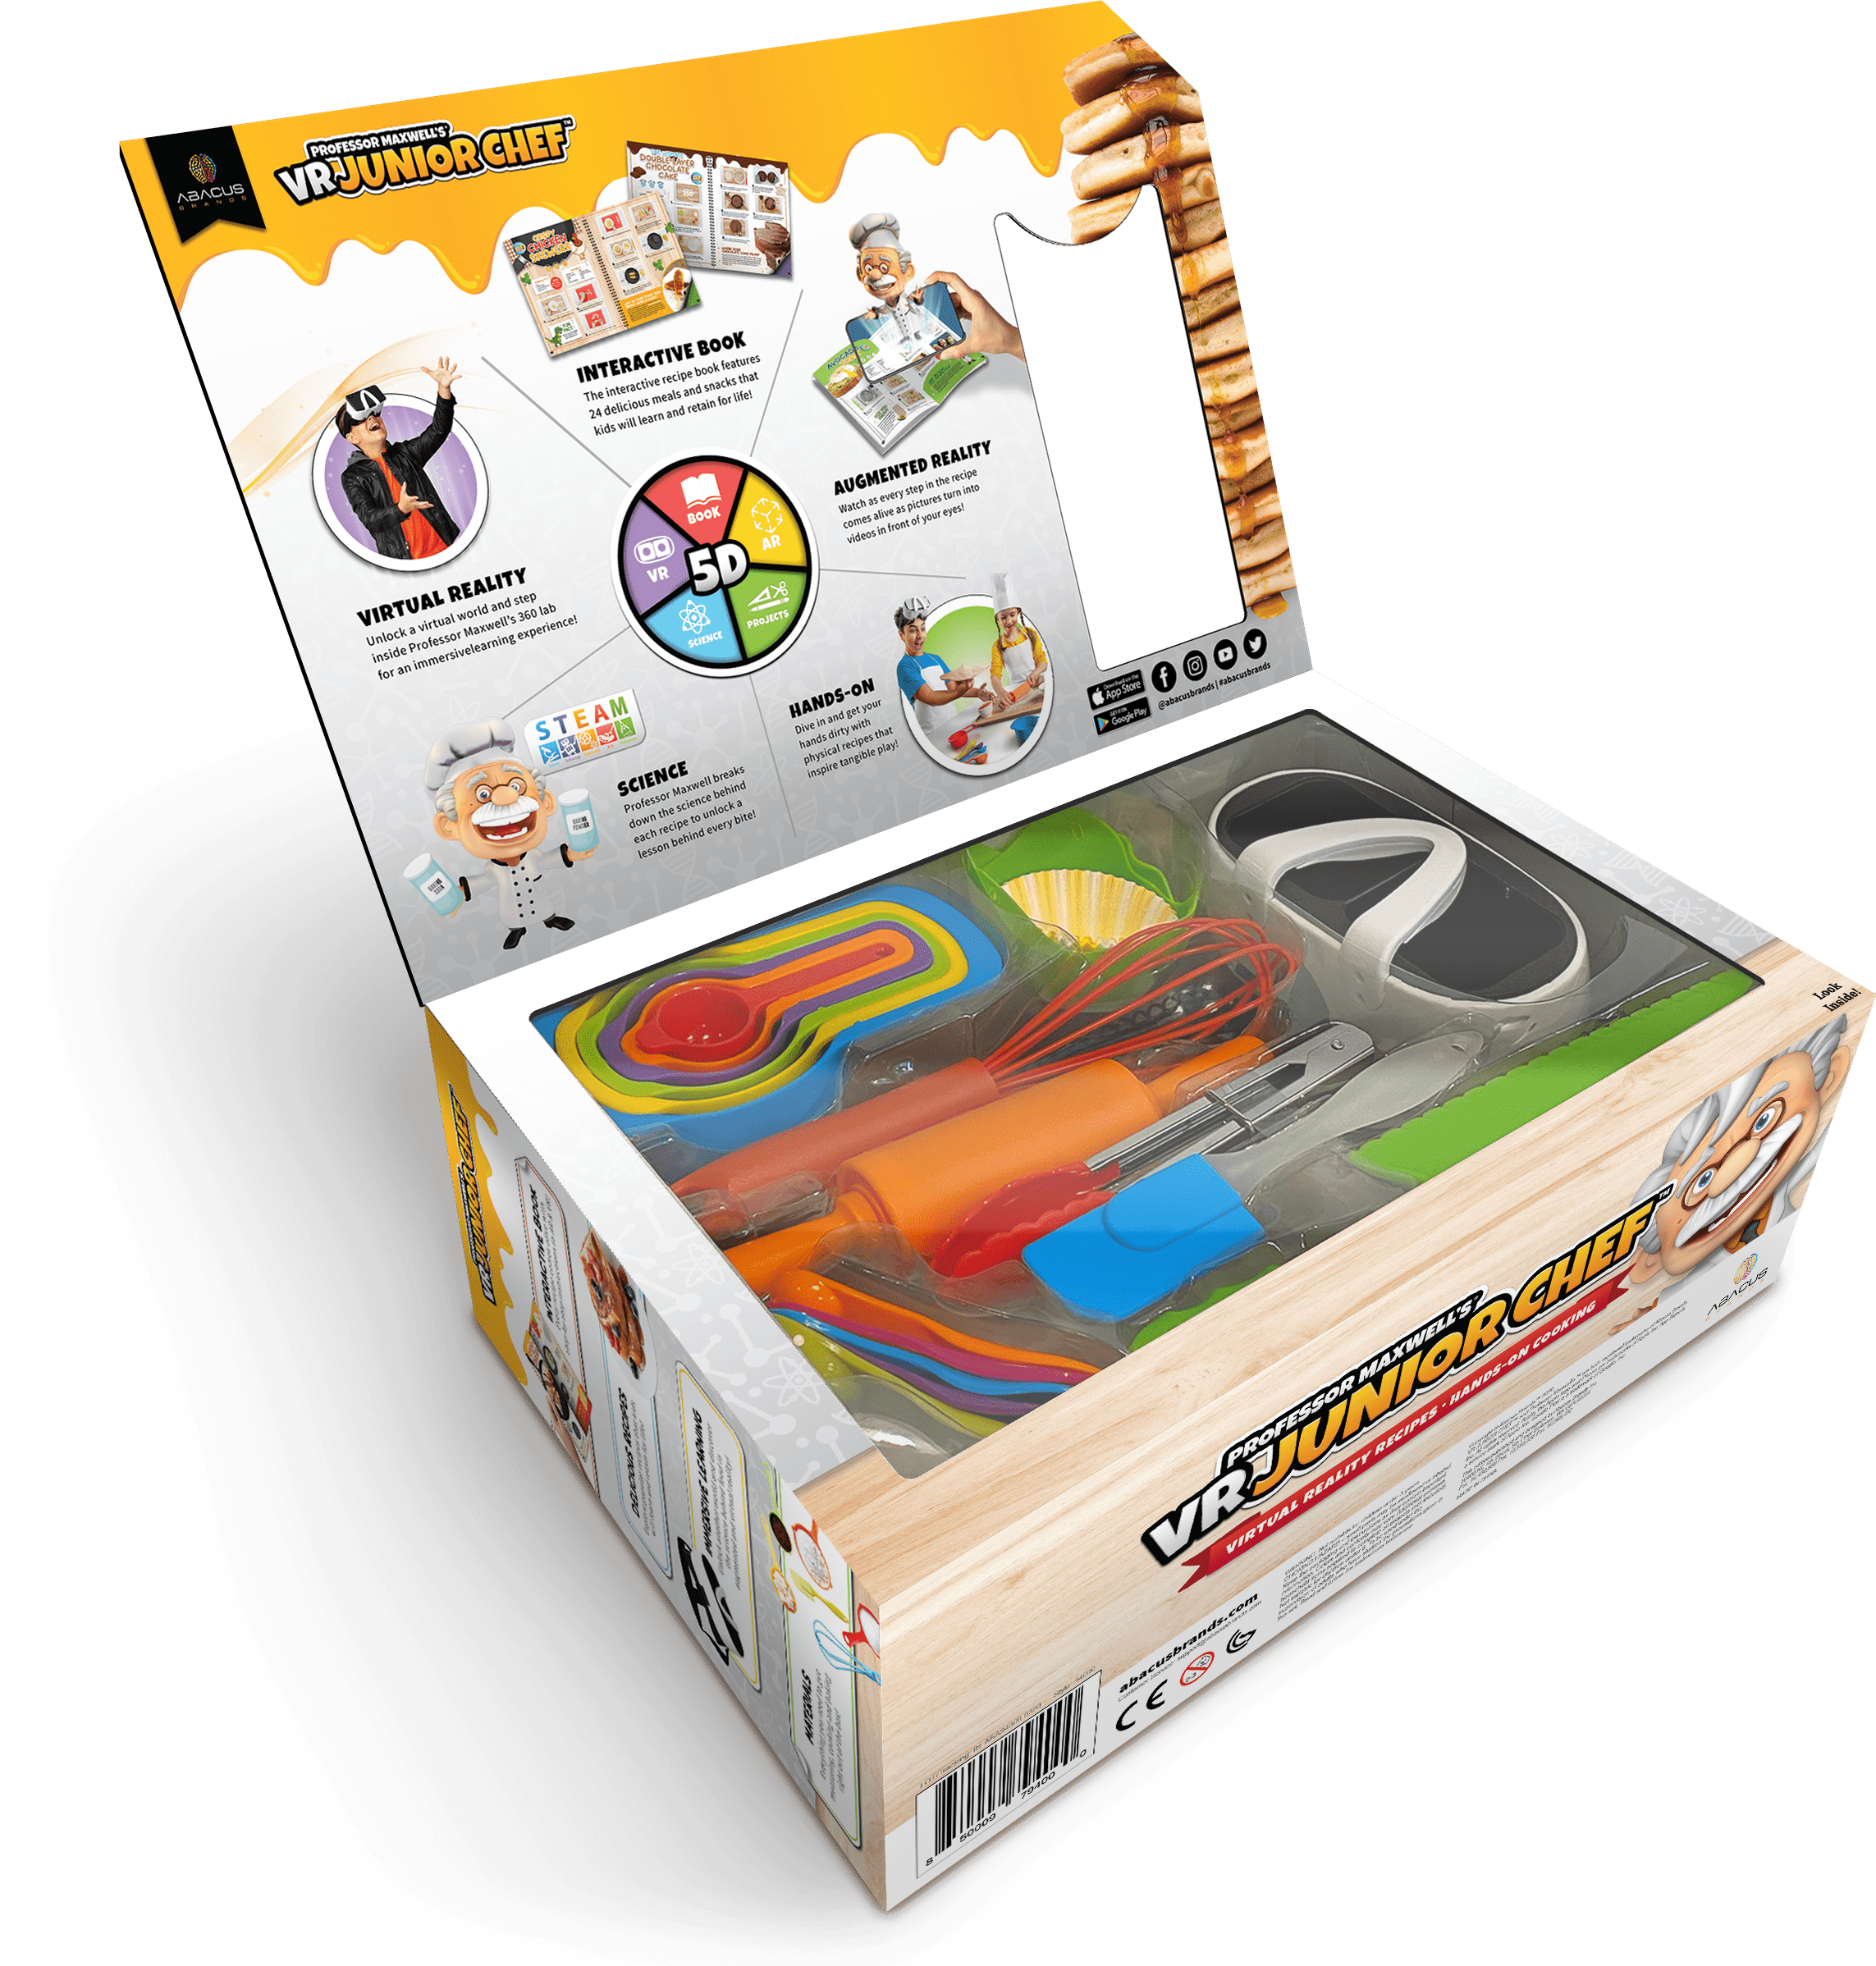 Professor Maxwell's Virtual Reality Cooking Kit for Kids - VR Junior Chef | Educational Food Science Kit